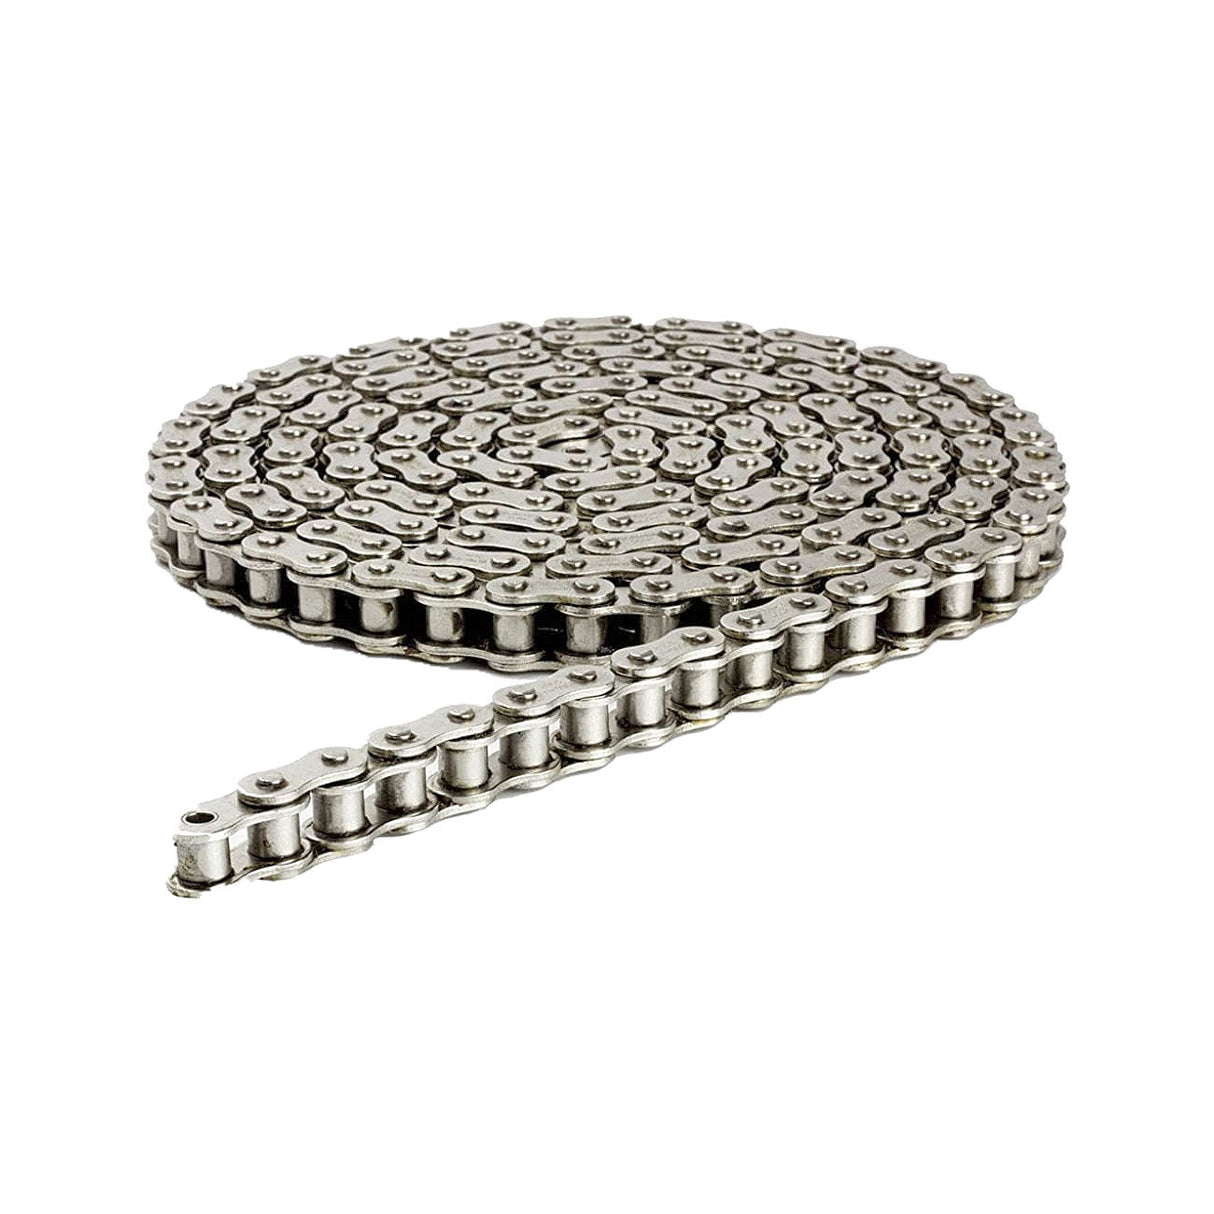 HySecurity MX002830 Roller Chain #40 Nickel Plated